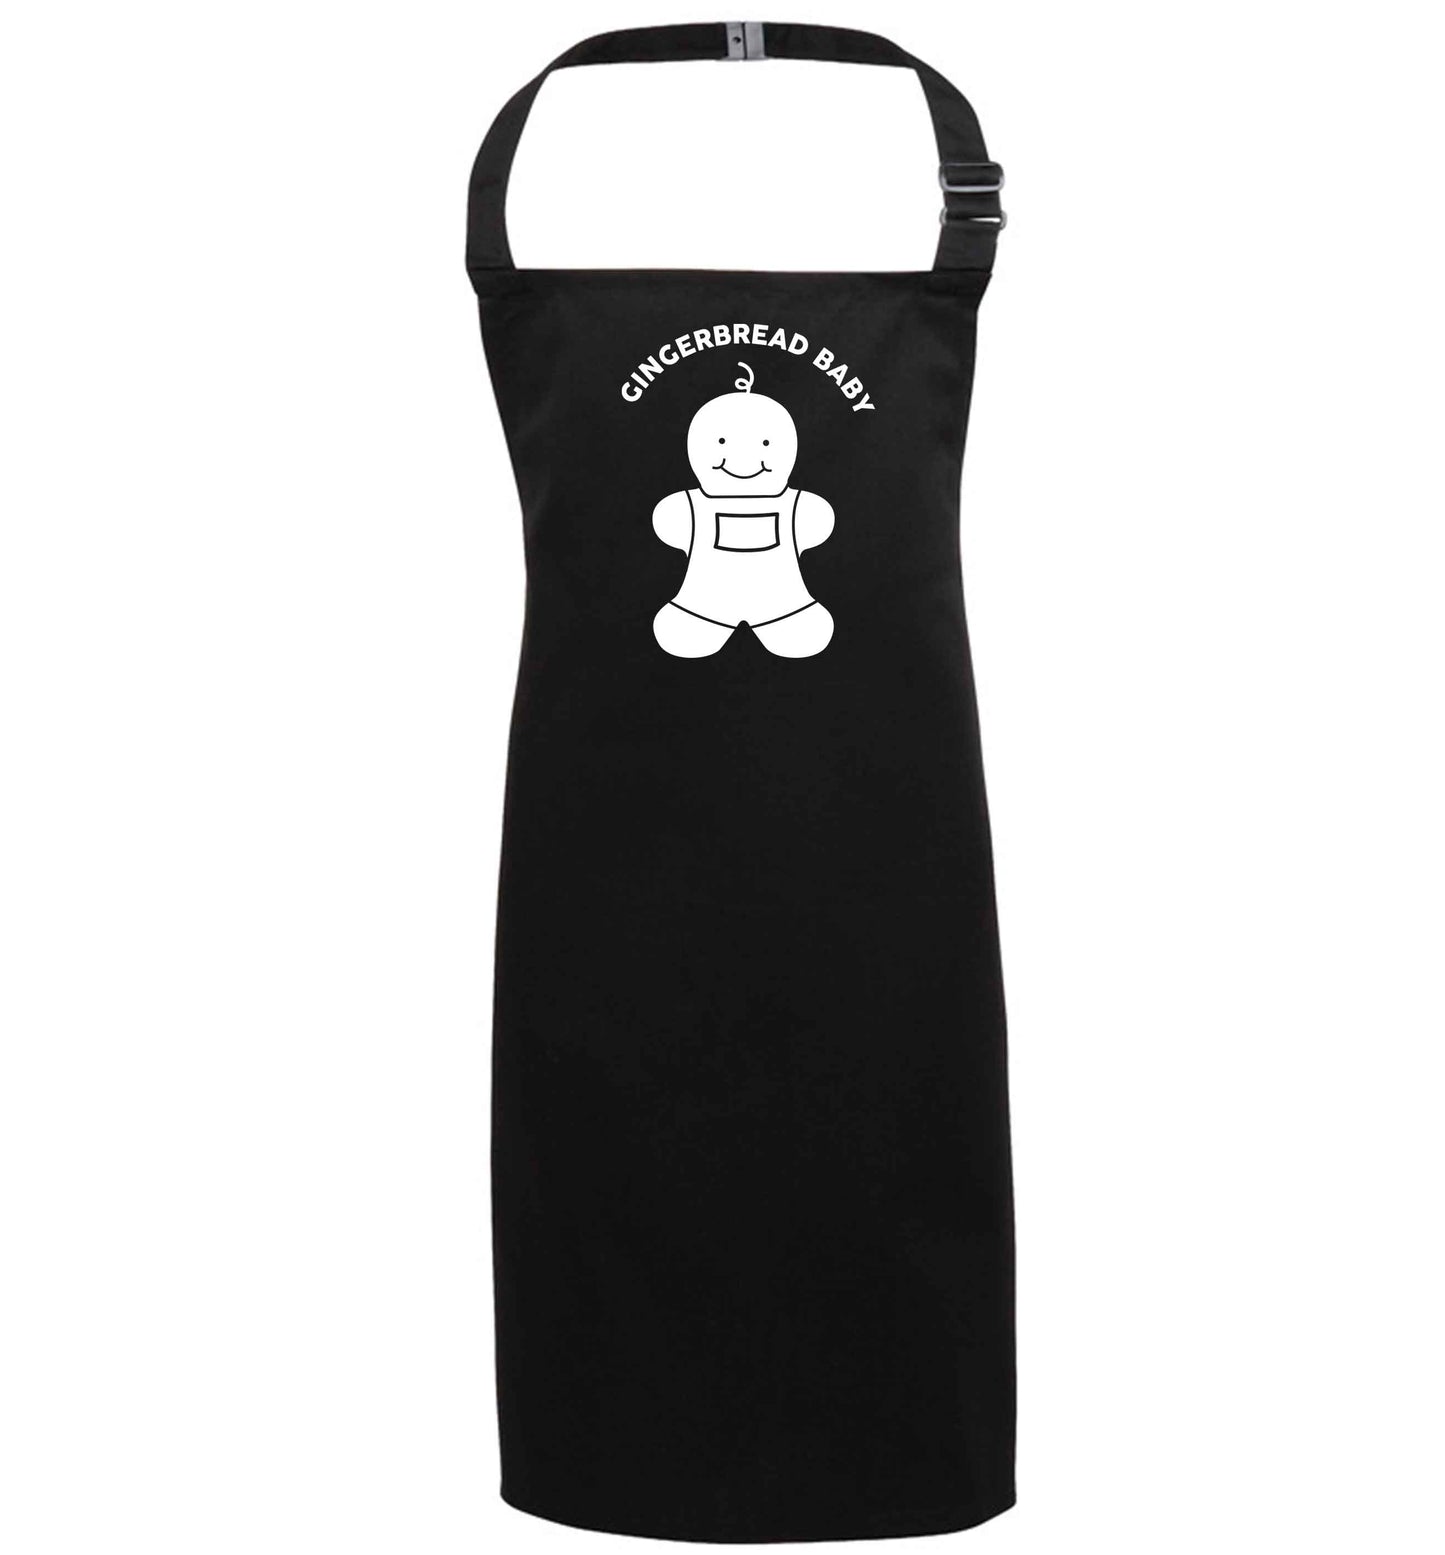 Gingerbread baby black apron 7-10 years